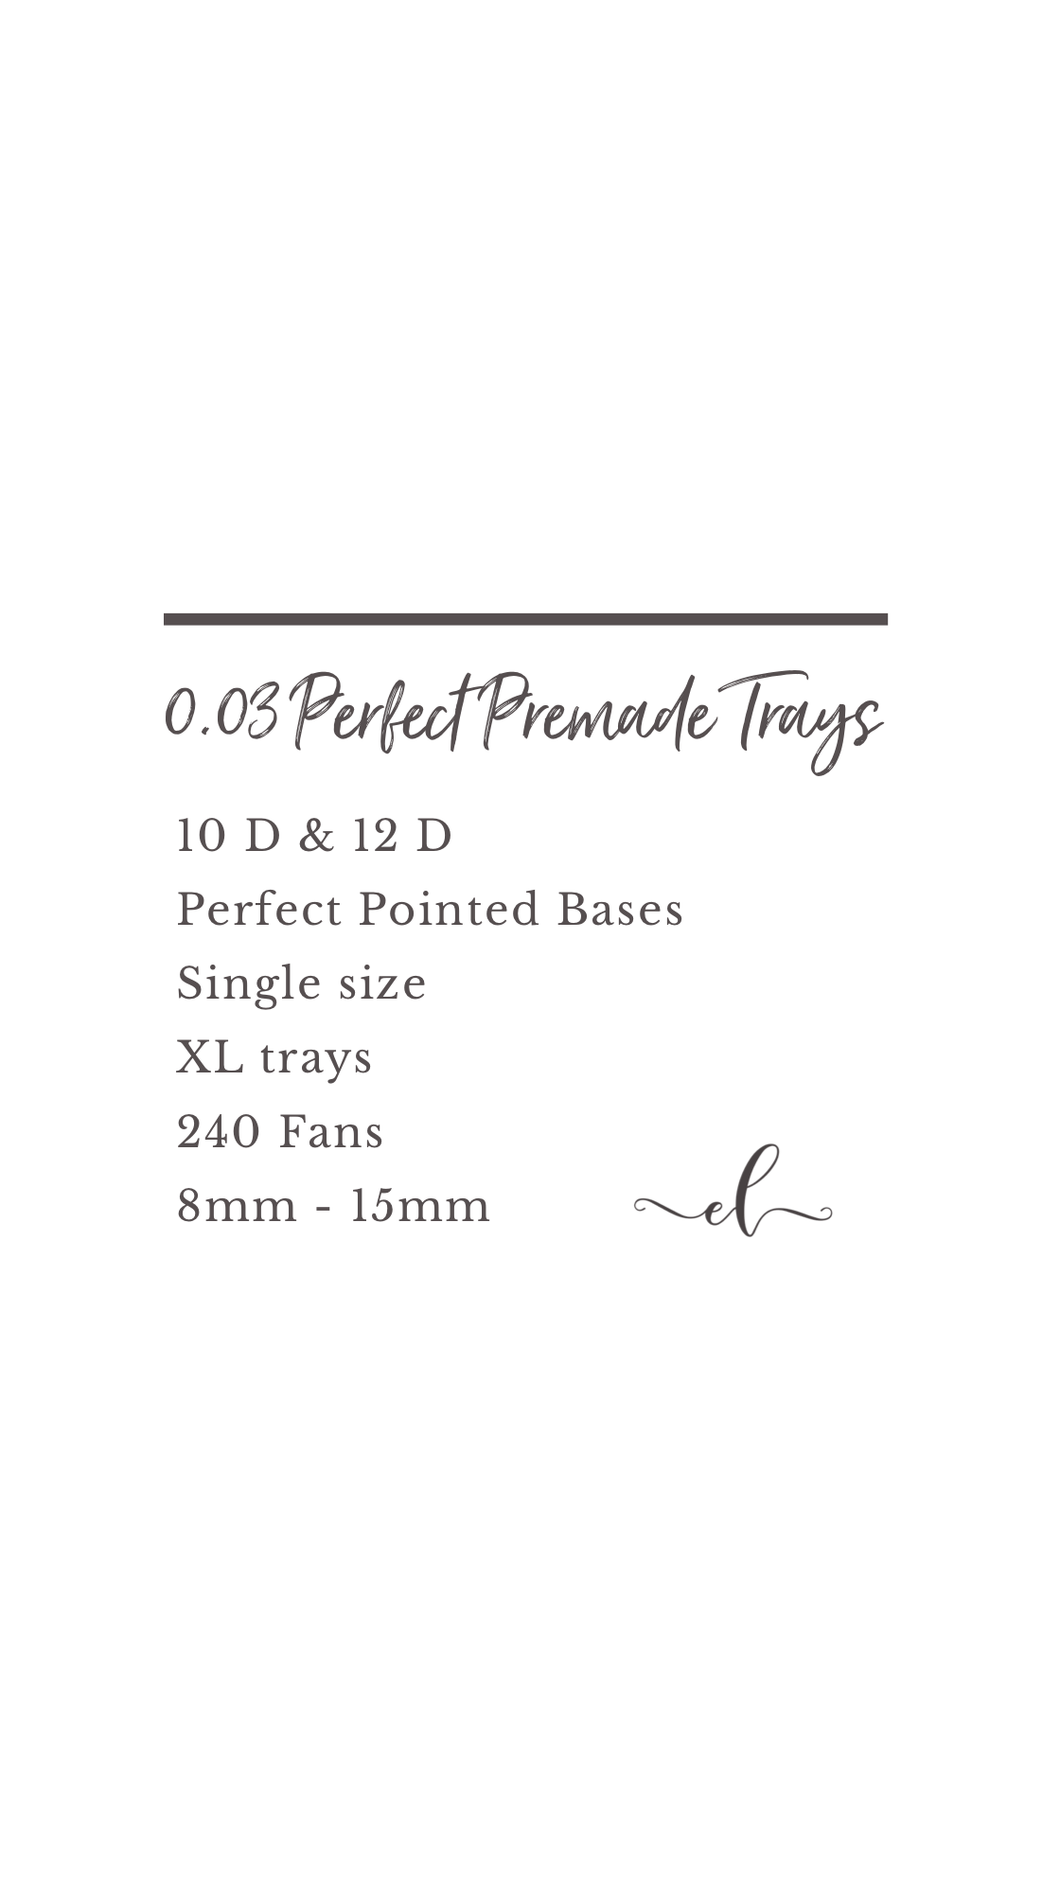 $10 SALE - XL 0.03 12D ‘Perfect Premade Collection’